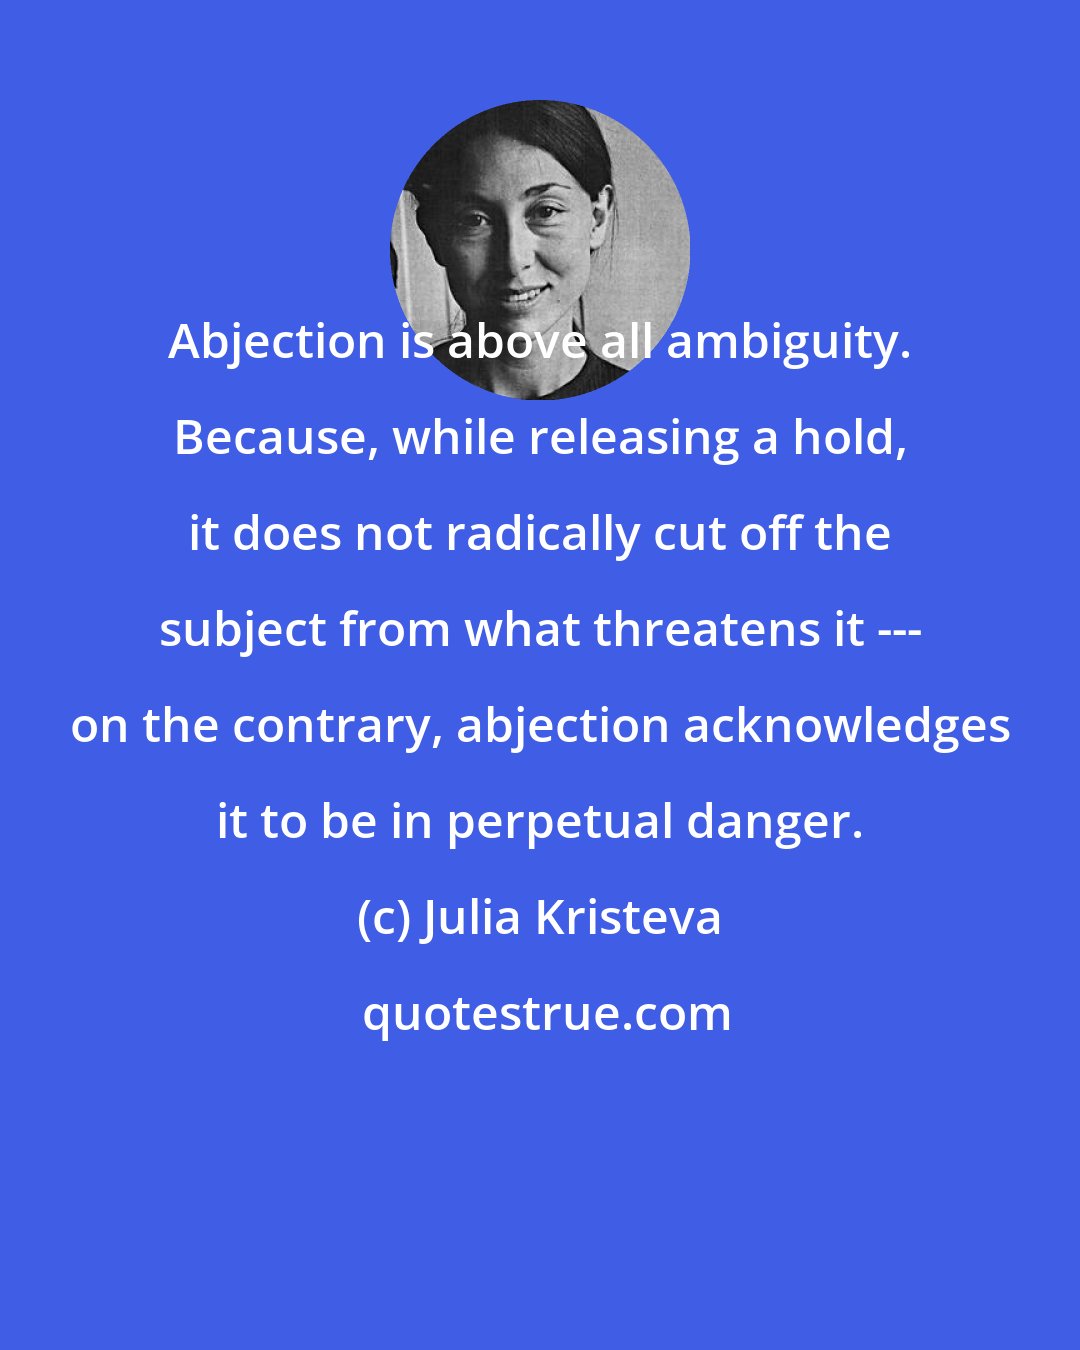 Julia Kristeva: Abjection is above all ambiguity. Because, while releasing a hold, it does not radically cut off the subject from what threatens it --- on the contrary, abjection acknowledges it to be in perpetual danger.